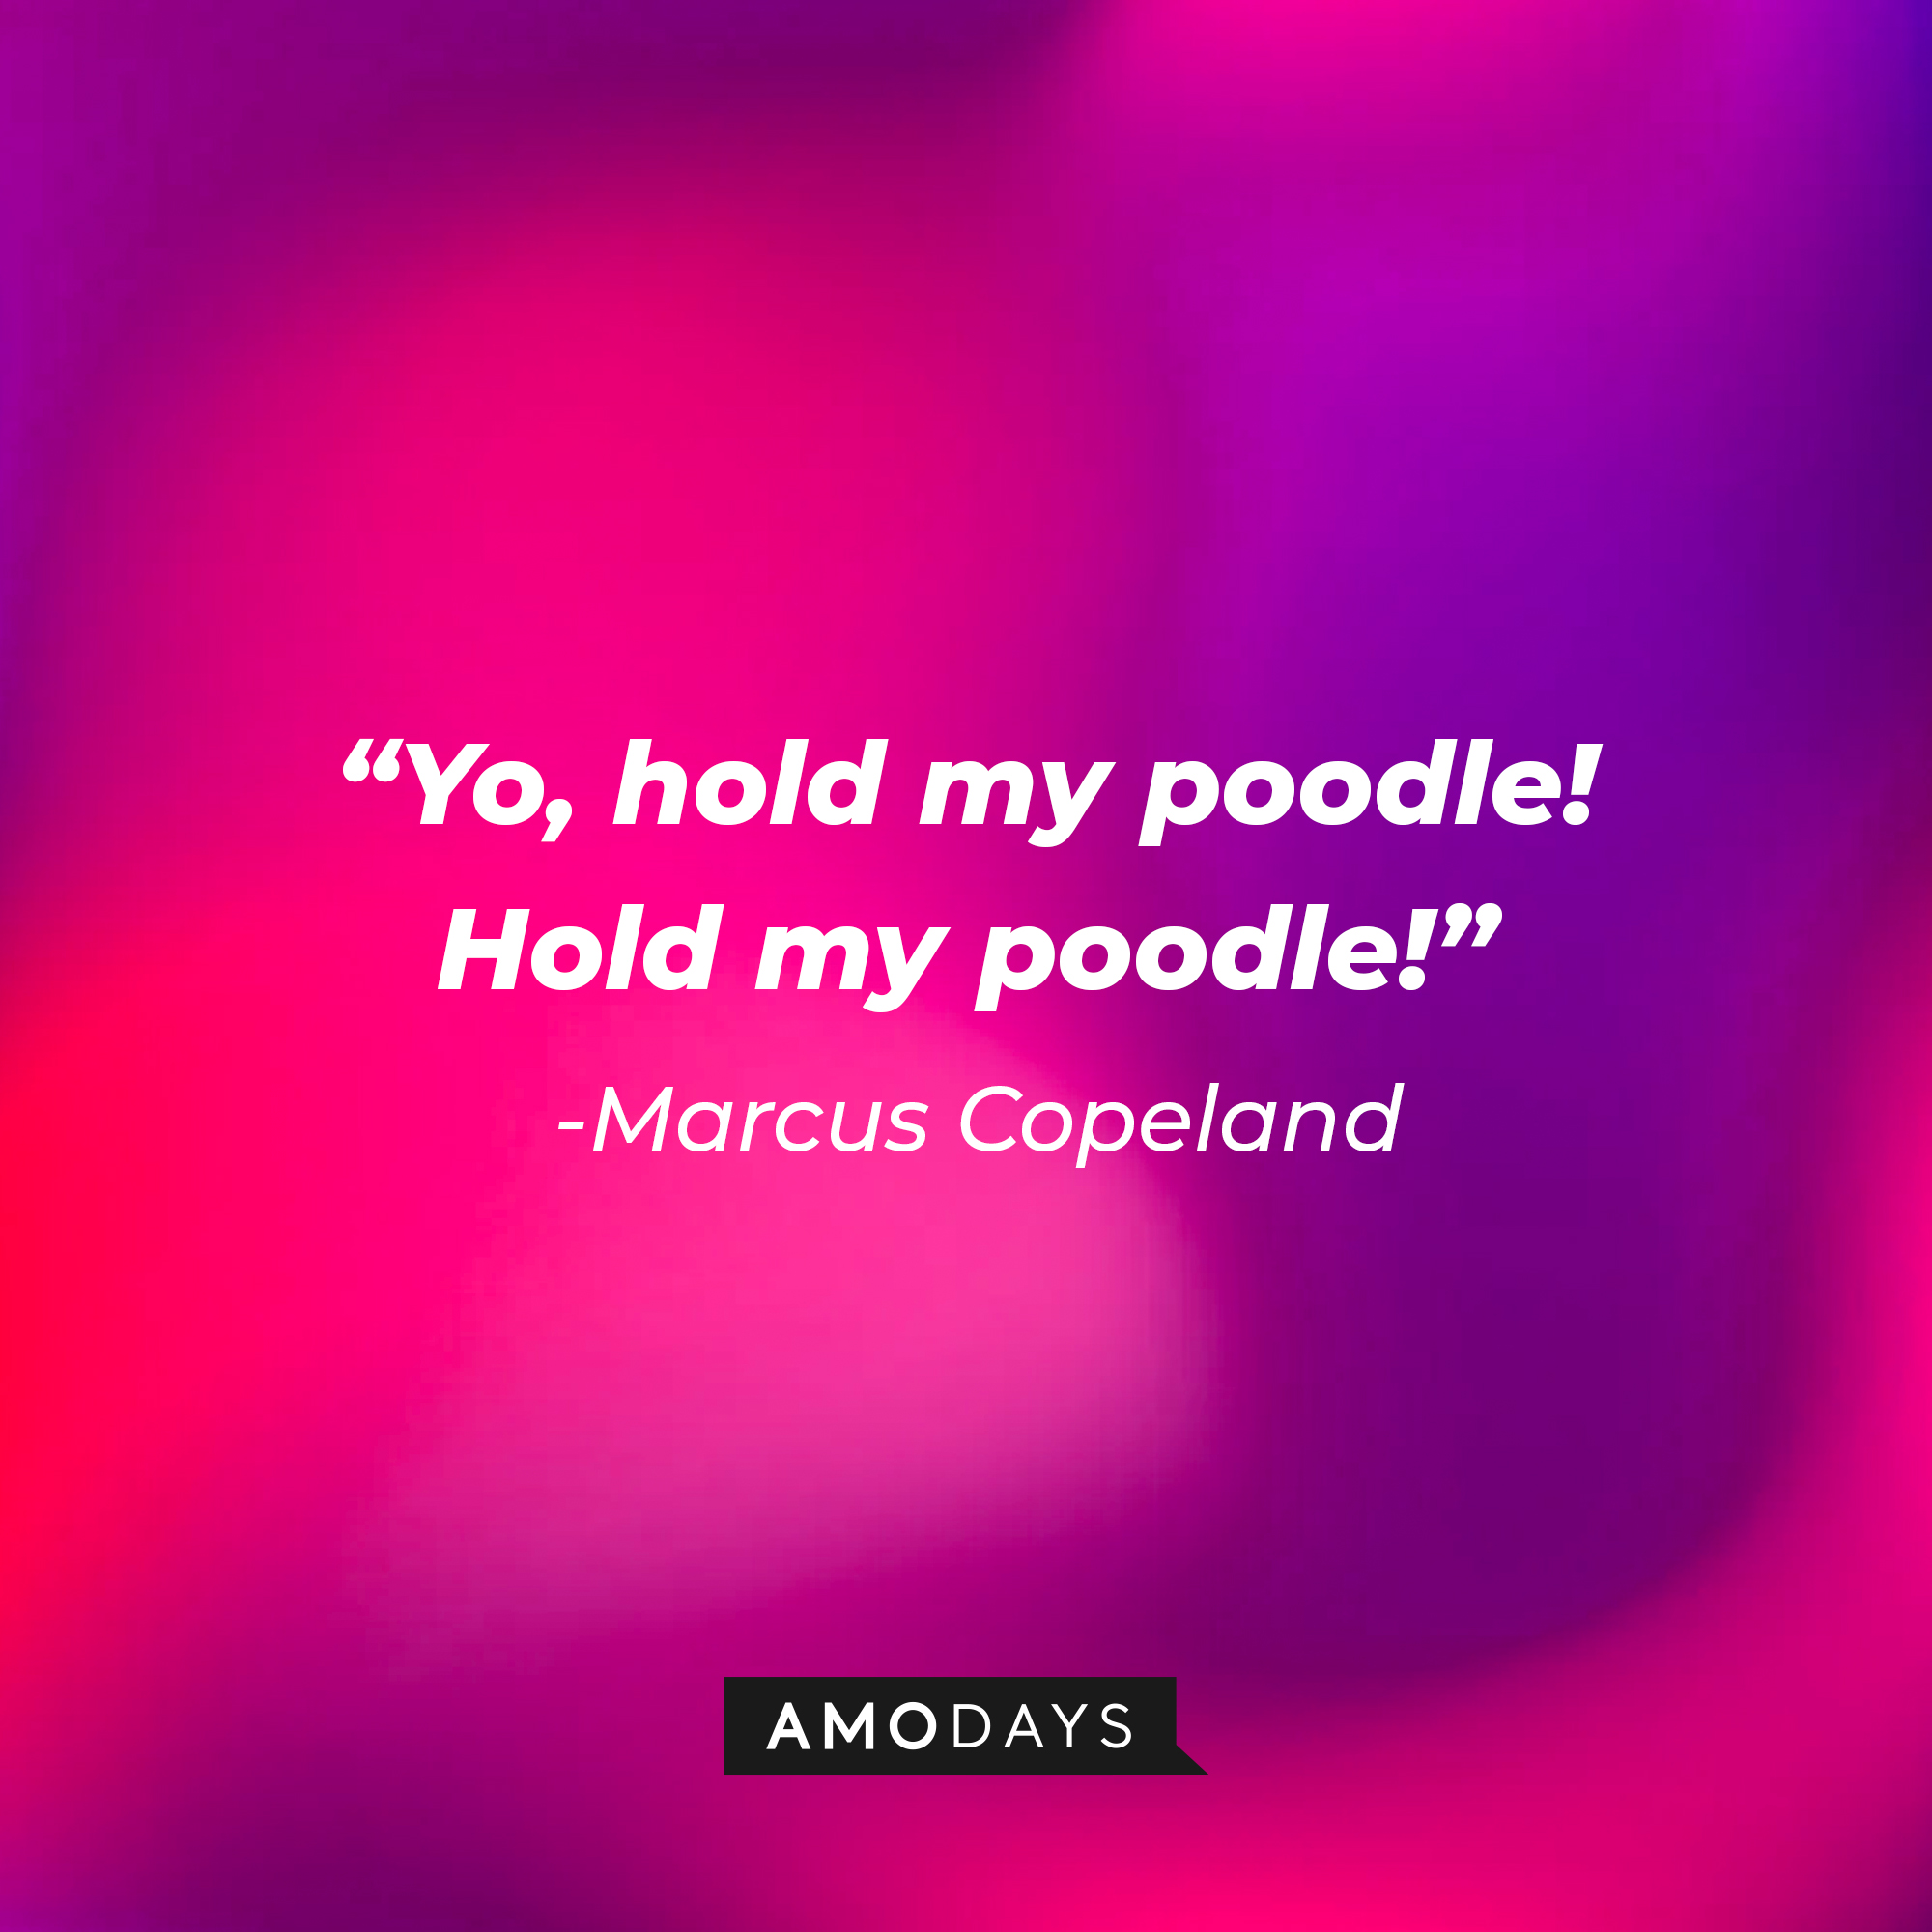 Marcus  Copeland’s quote: “Yo, hold my poodle! Hold my poodle!”  | Source: AmoDays